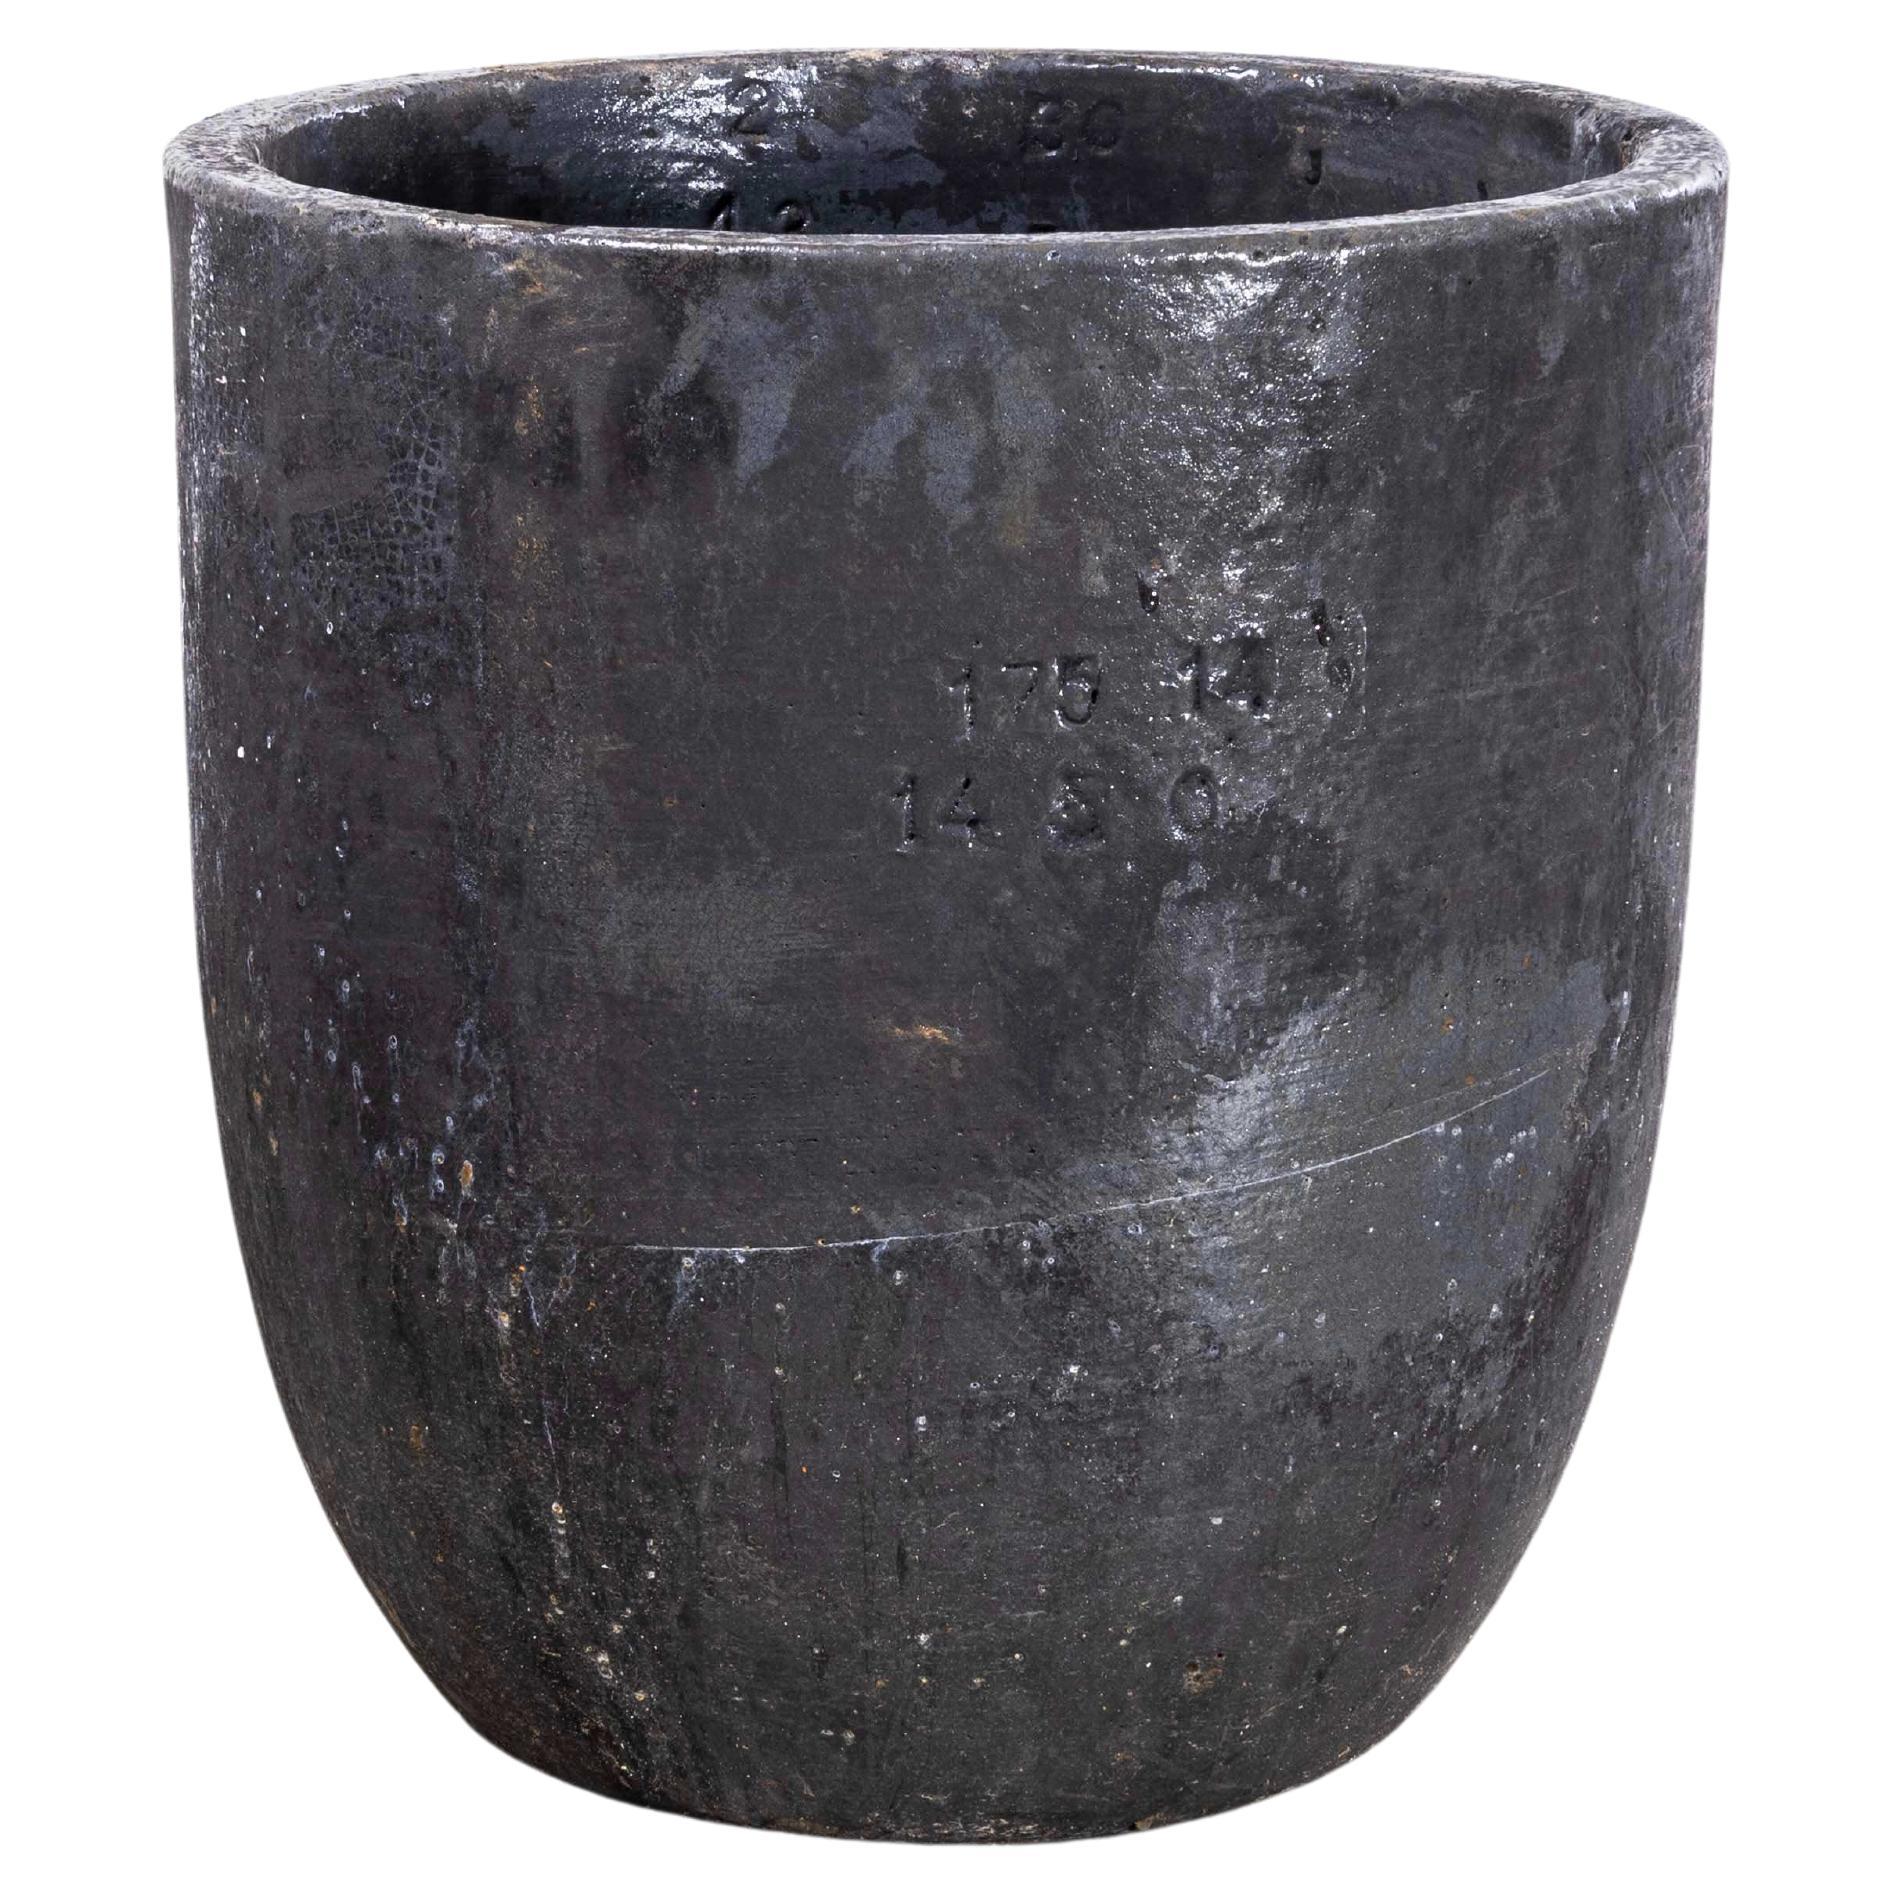 1970's New Old Stock Foundry Crucible Pot (1525.8)